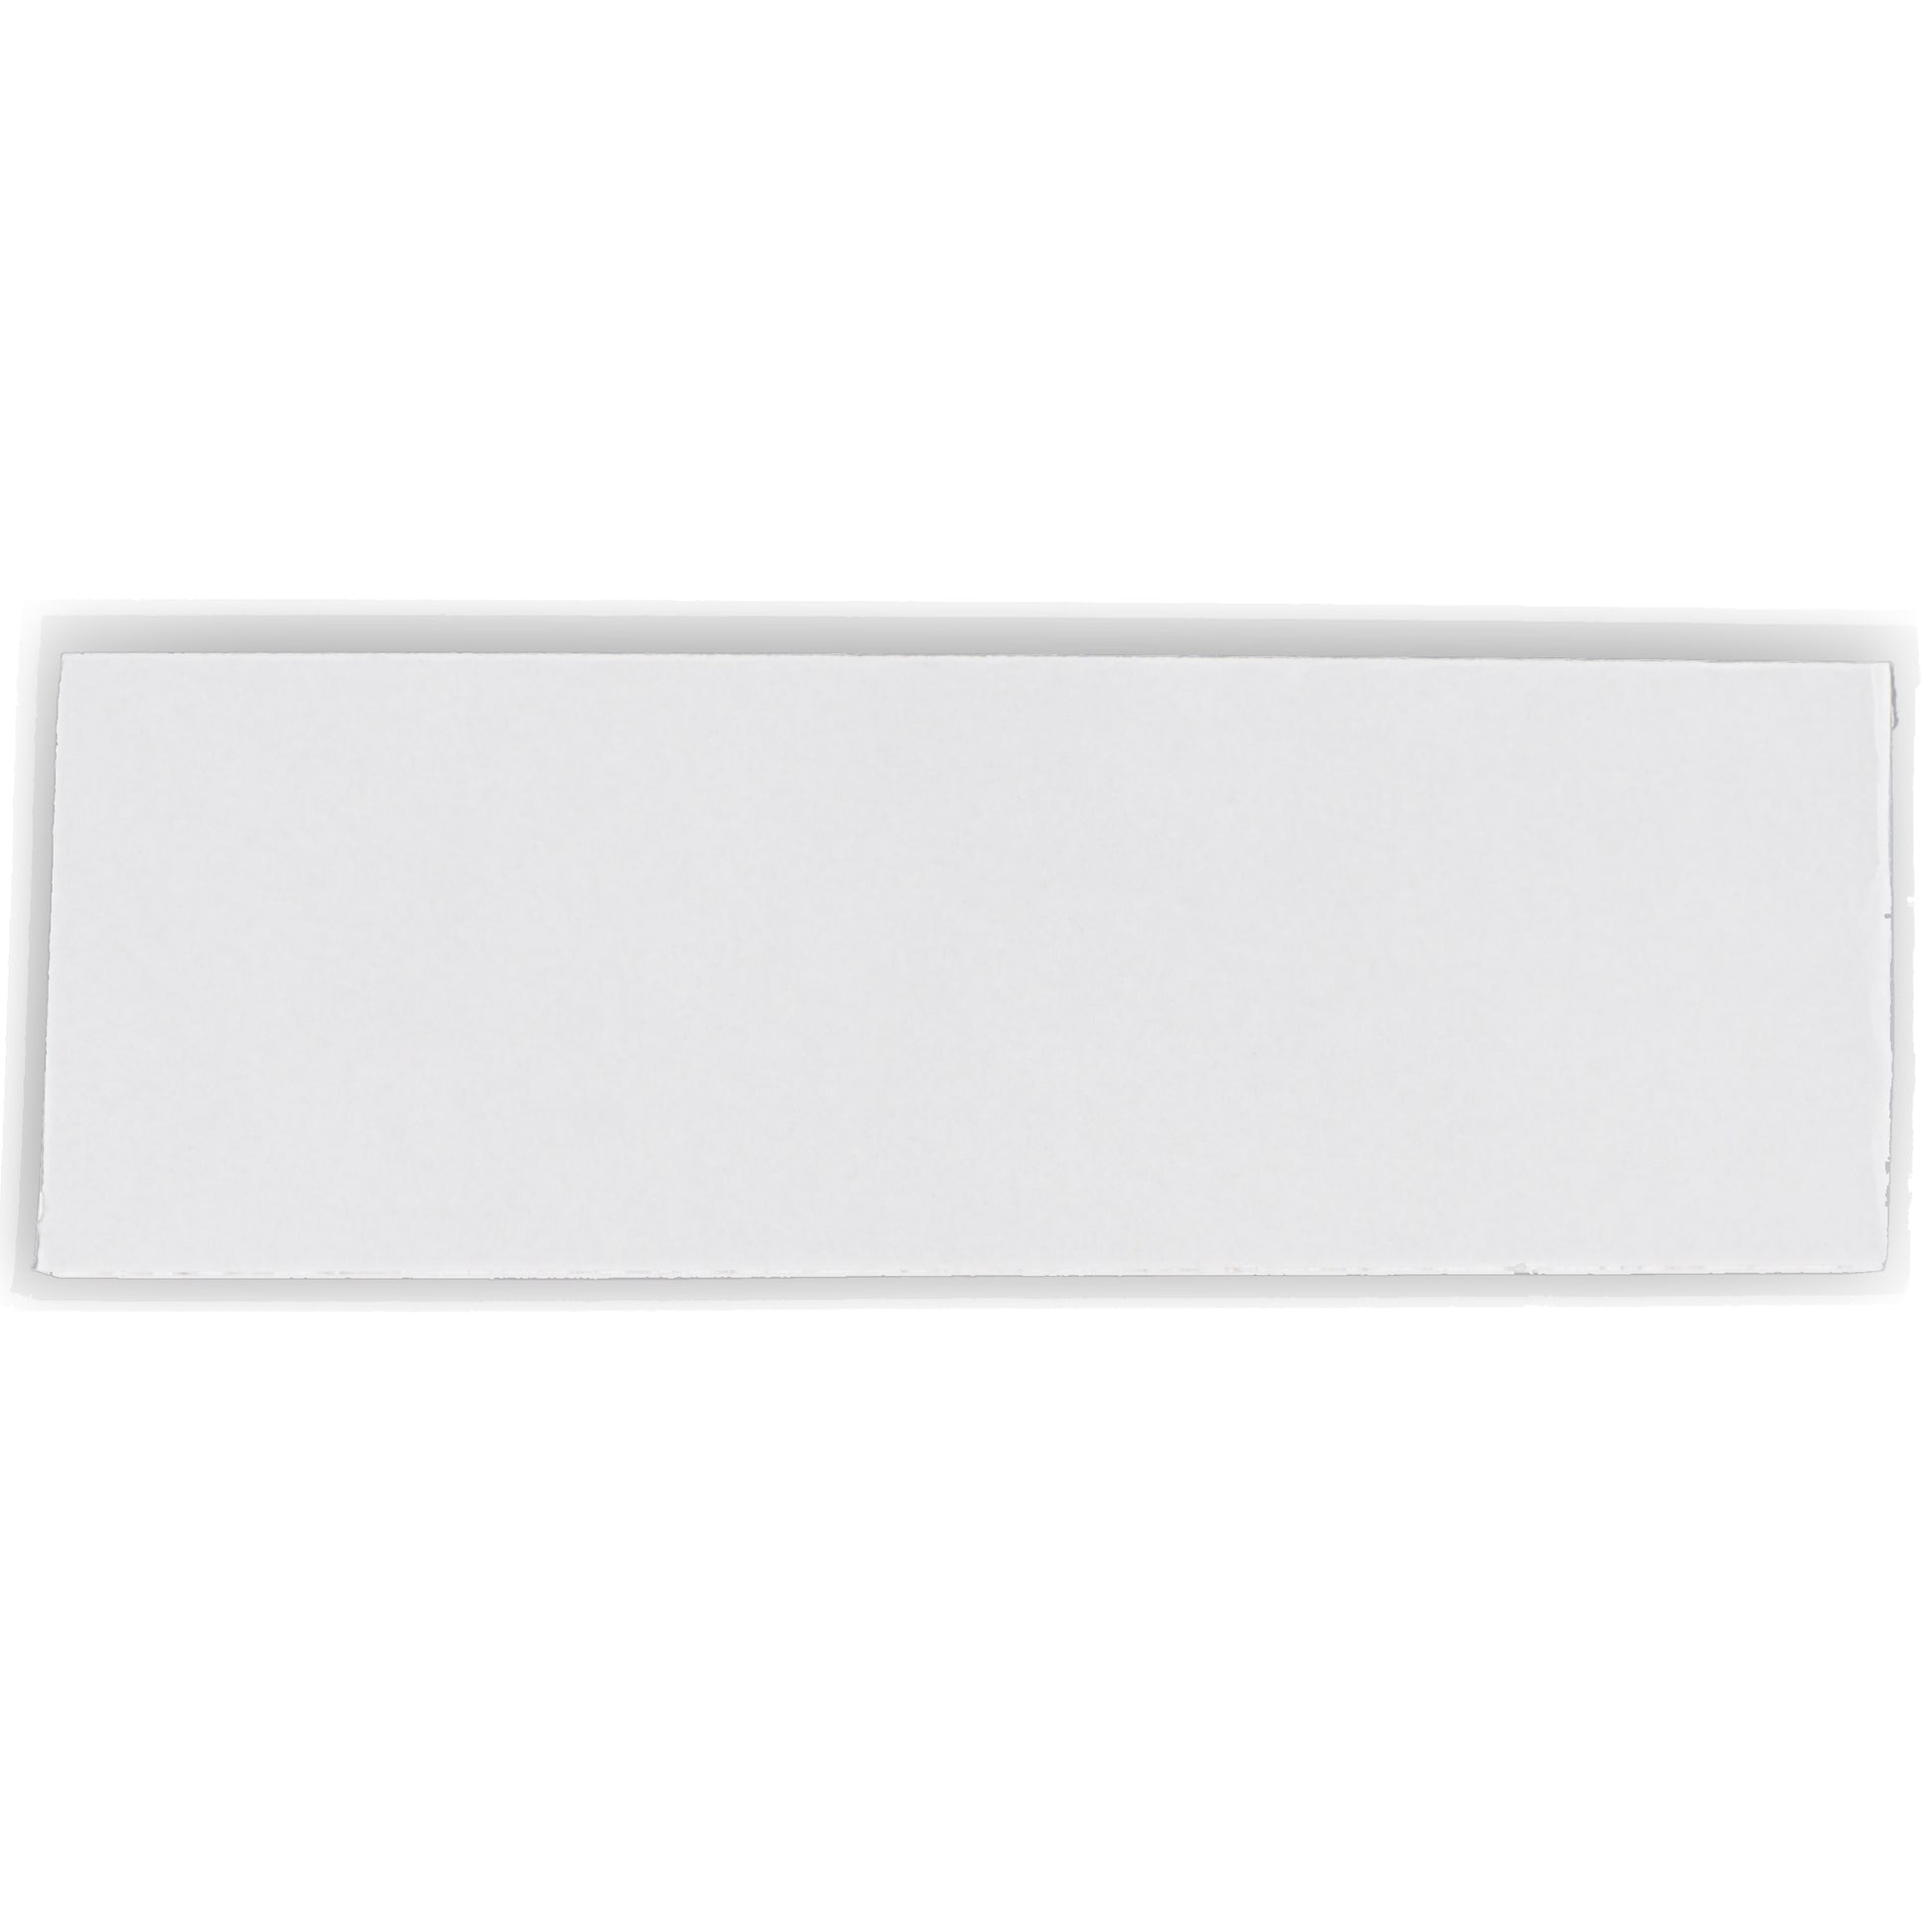 Load image into Gallery viewer, ZG03040W/WKS50 Magnetic Labeling Strip with White Vinyl Surface - Bottom View